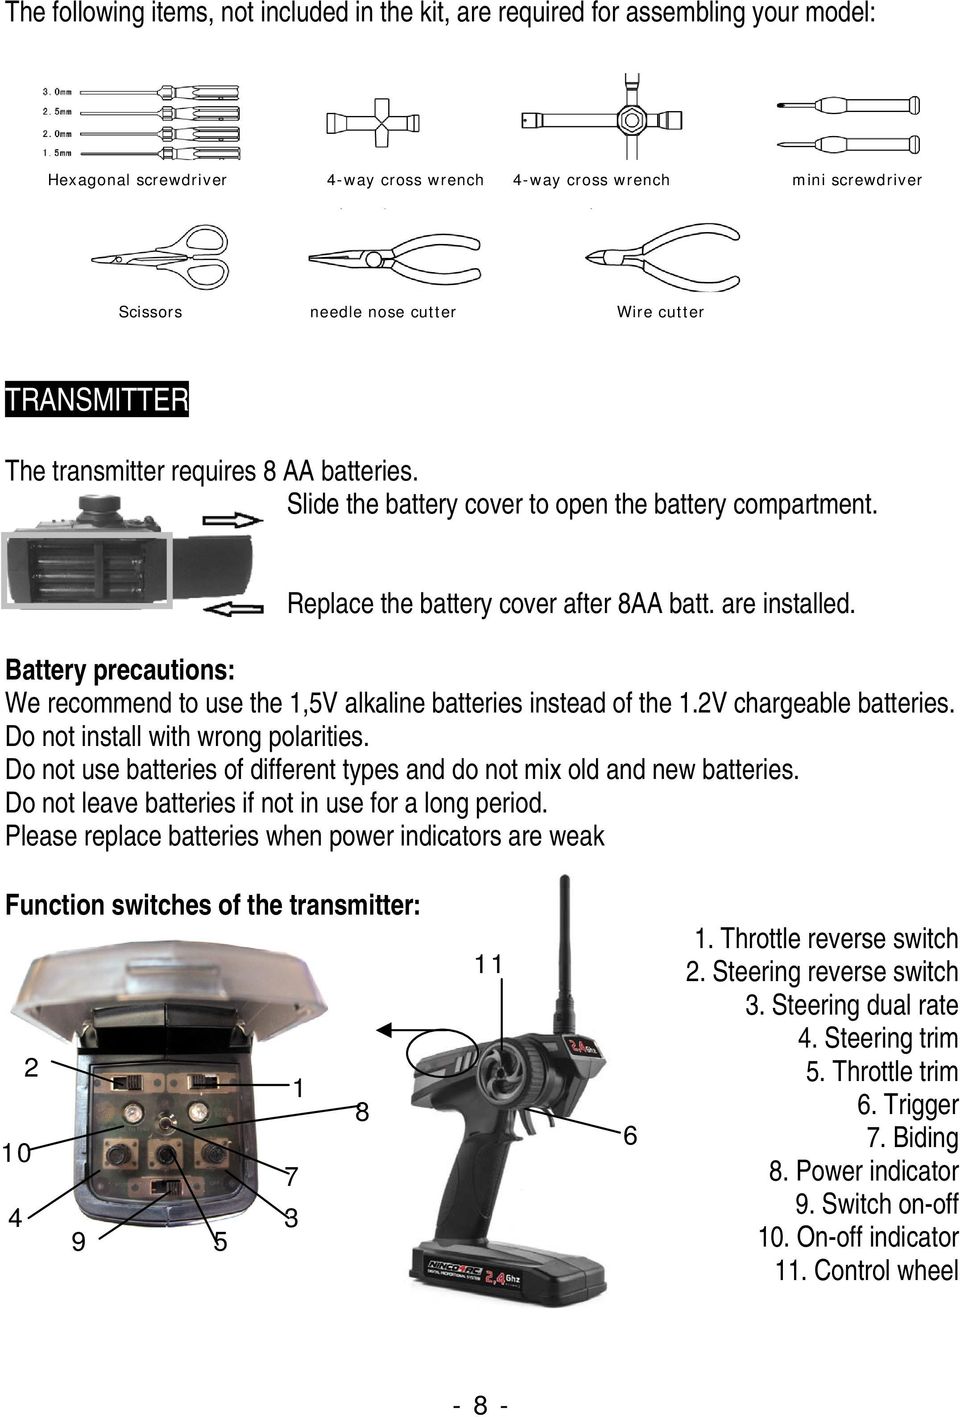 Battery precautions: We recommend to use the 1,5V alkaline batteries instead of the 1.2V chargeable batteries. Do not install with wrong polarities.